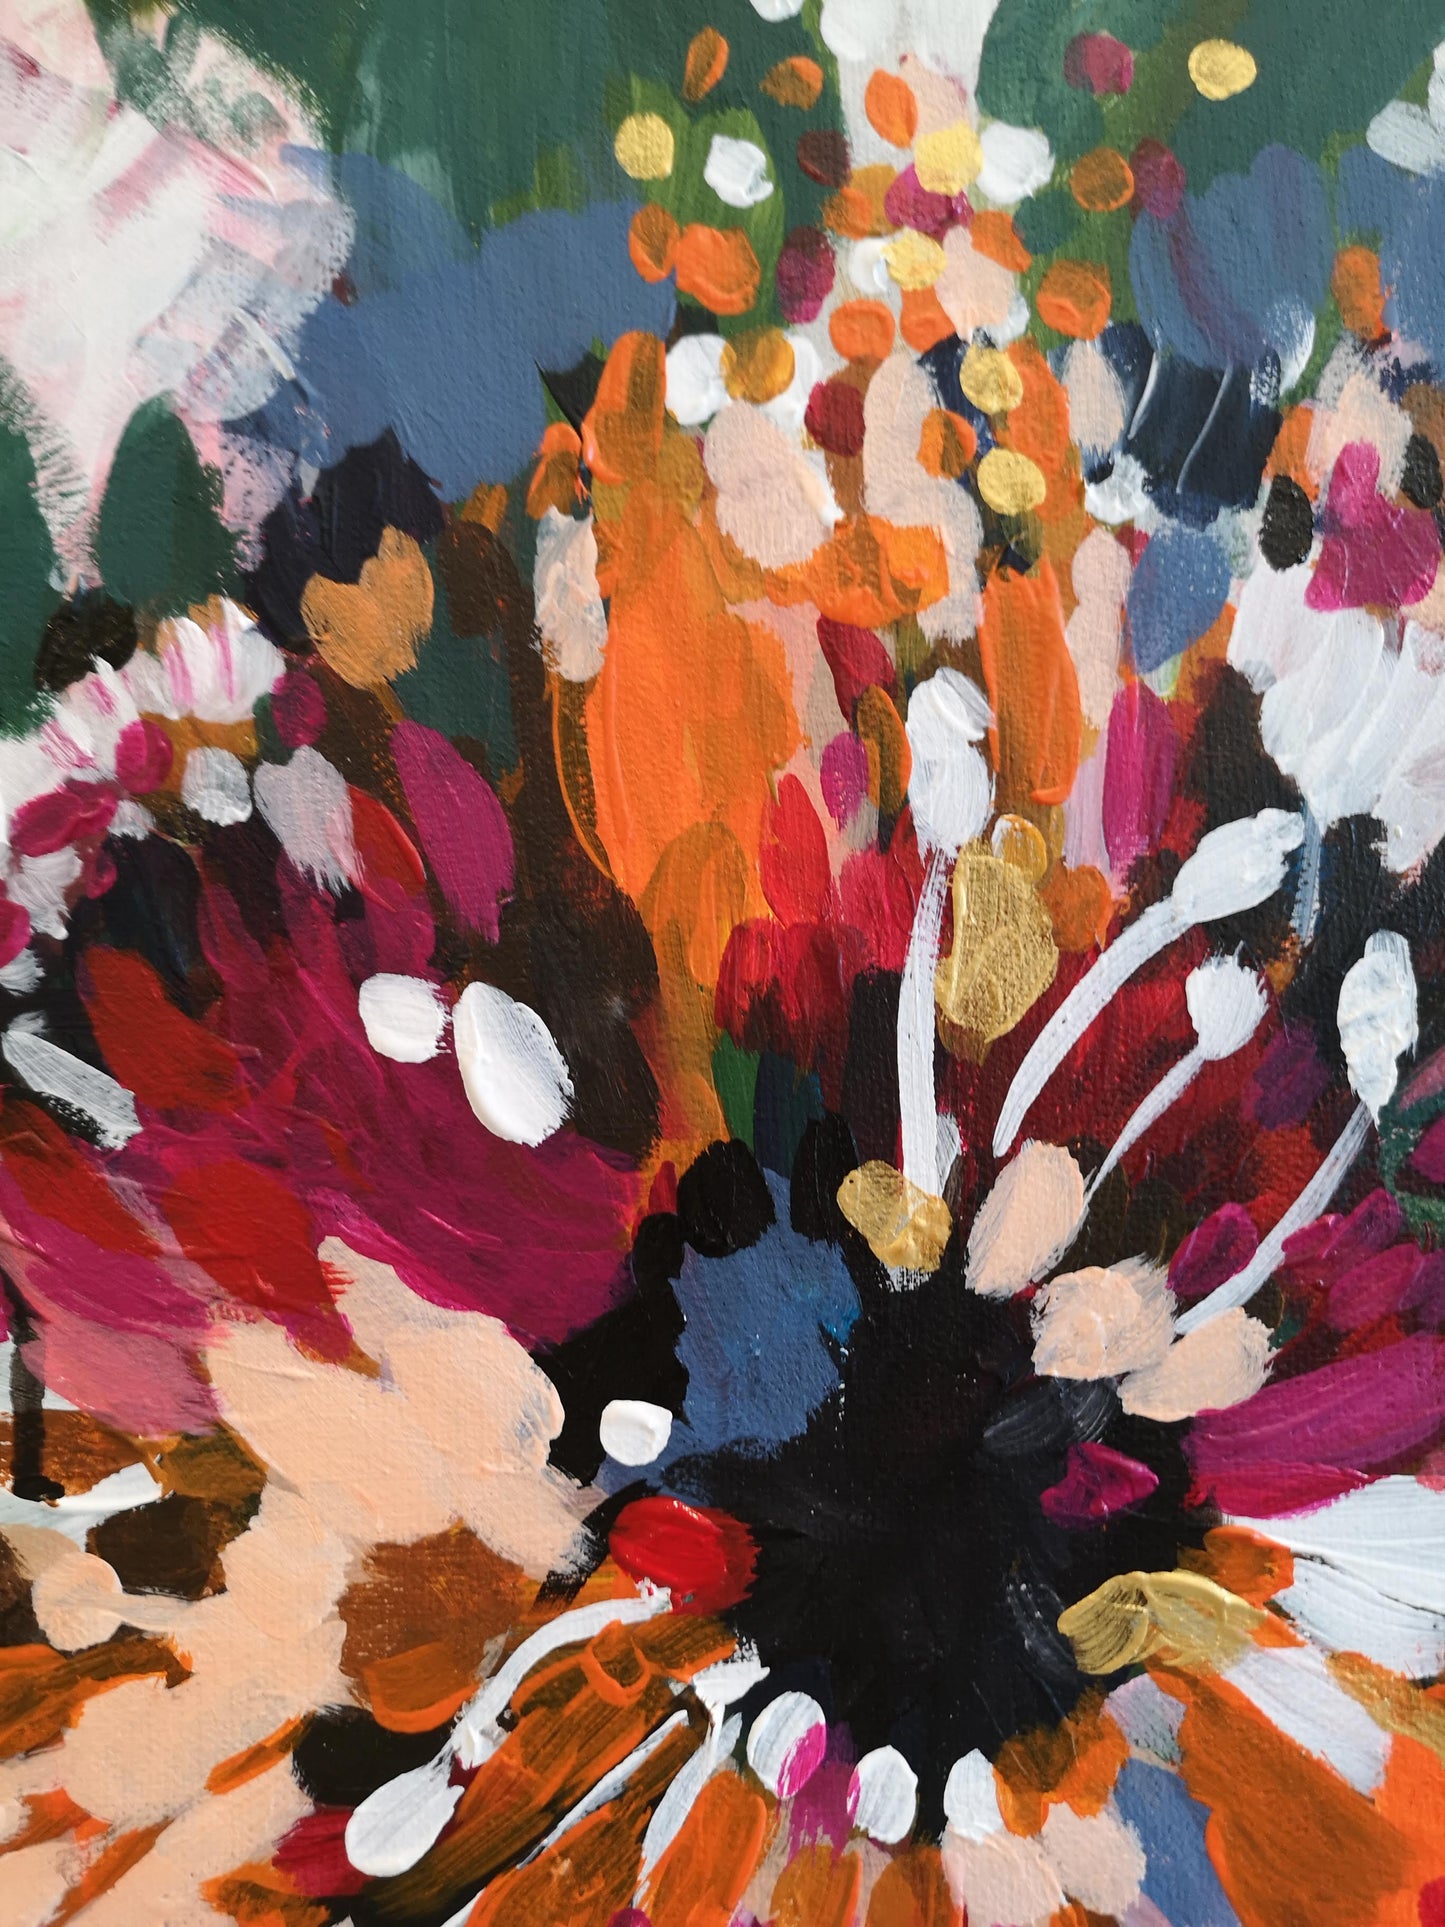 Close up of original abstract painting 'Tropical Garden' by Judy Century. Expressive magenta, orange, brown, gold, red, green, white and black brushstrokes.